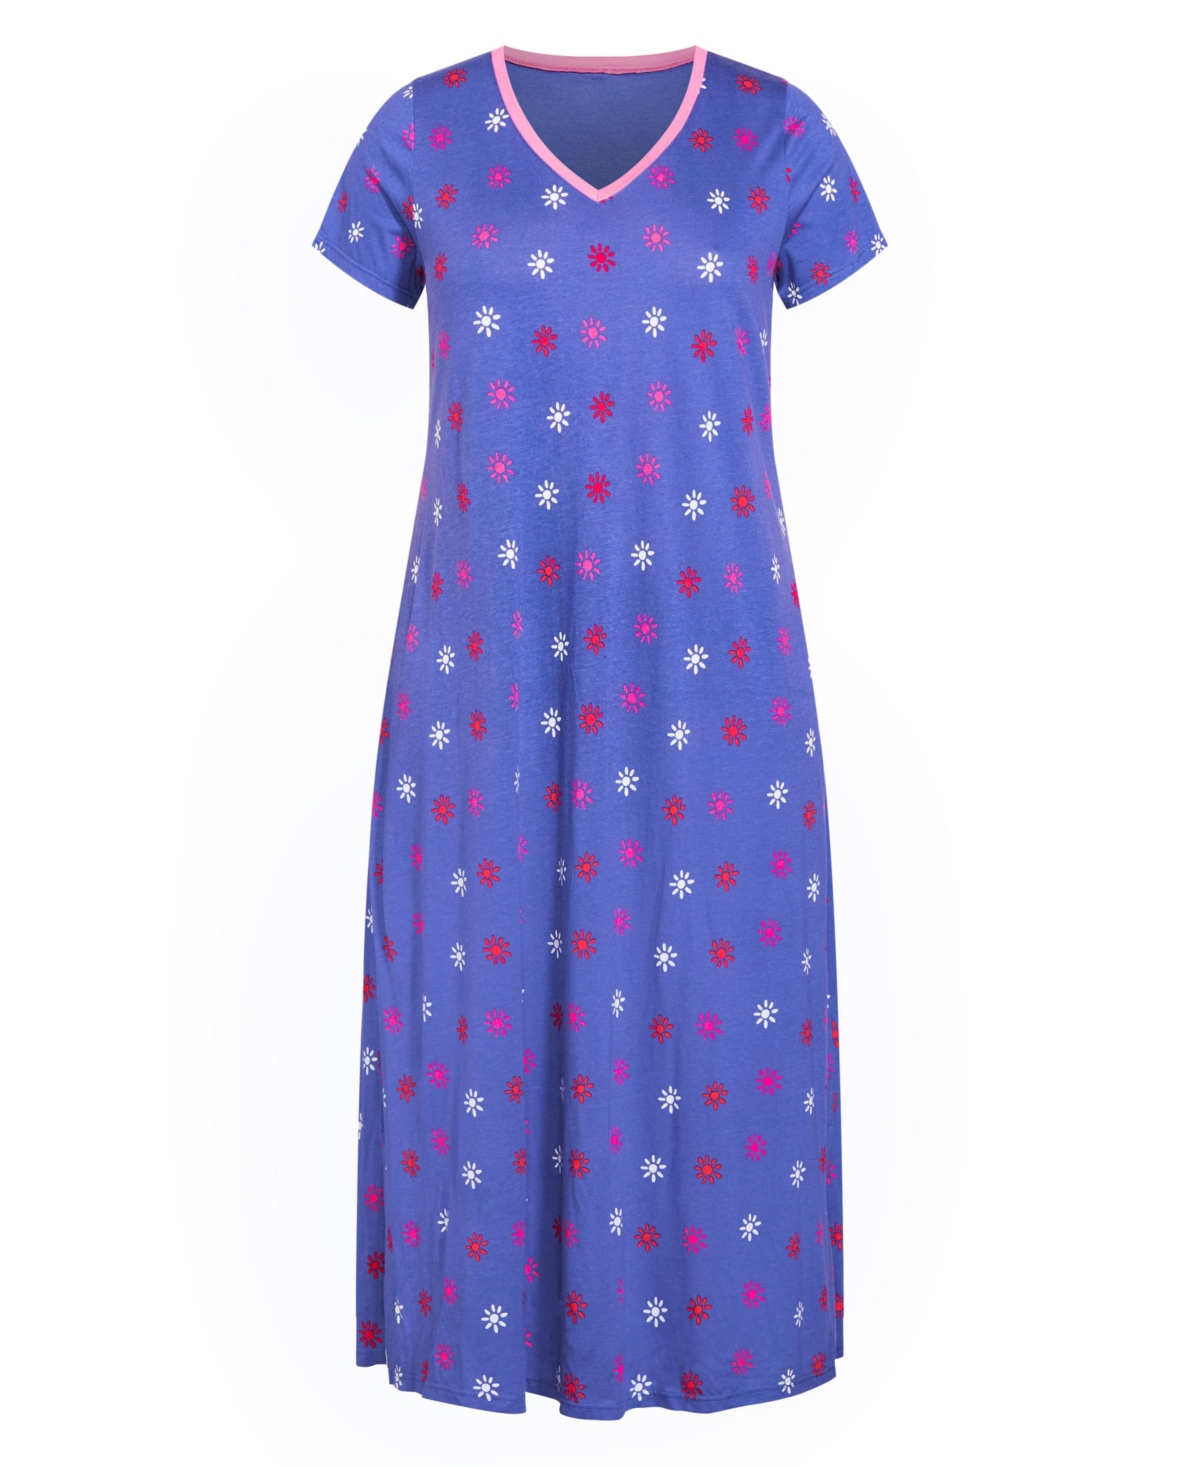 Womens Plus size Short Sleeve Maxi Sleep Dress - periwinkle floral - Ditsy floral